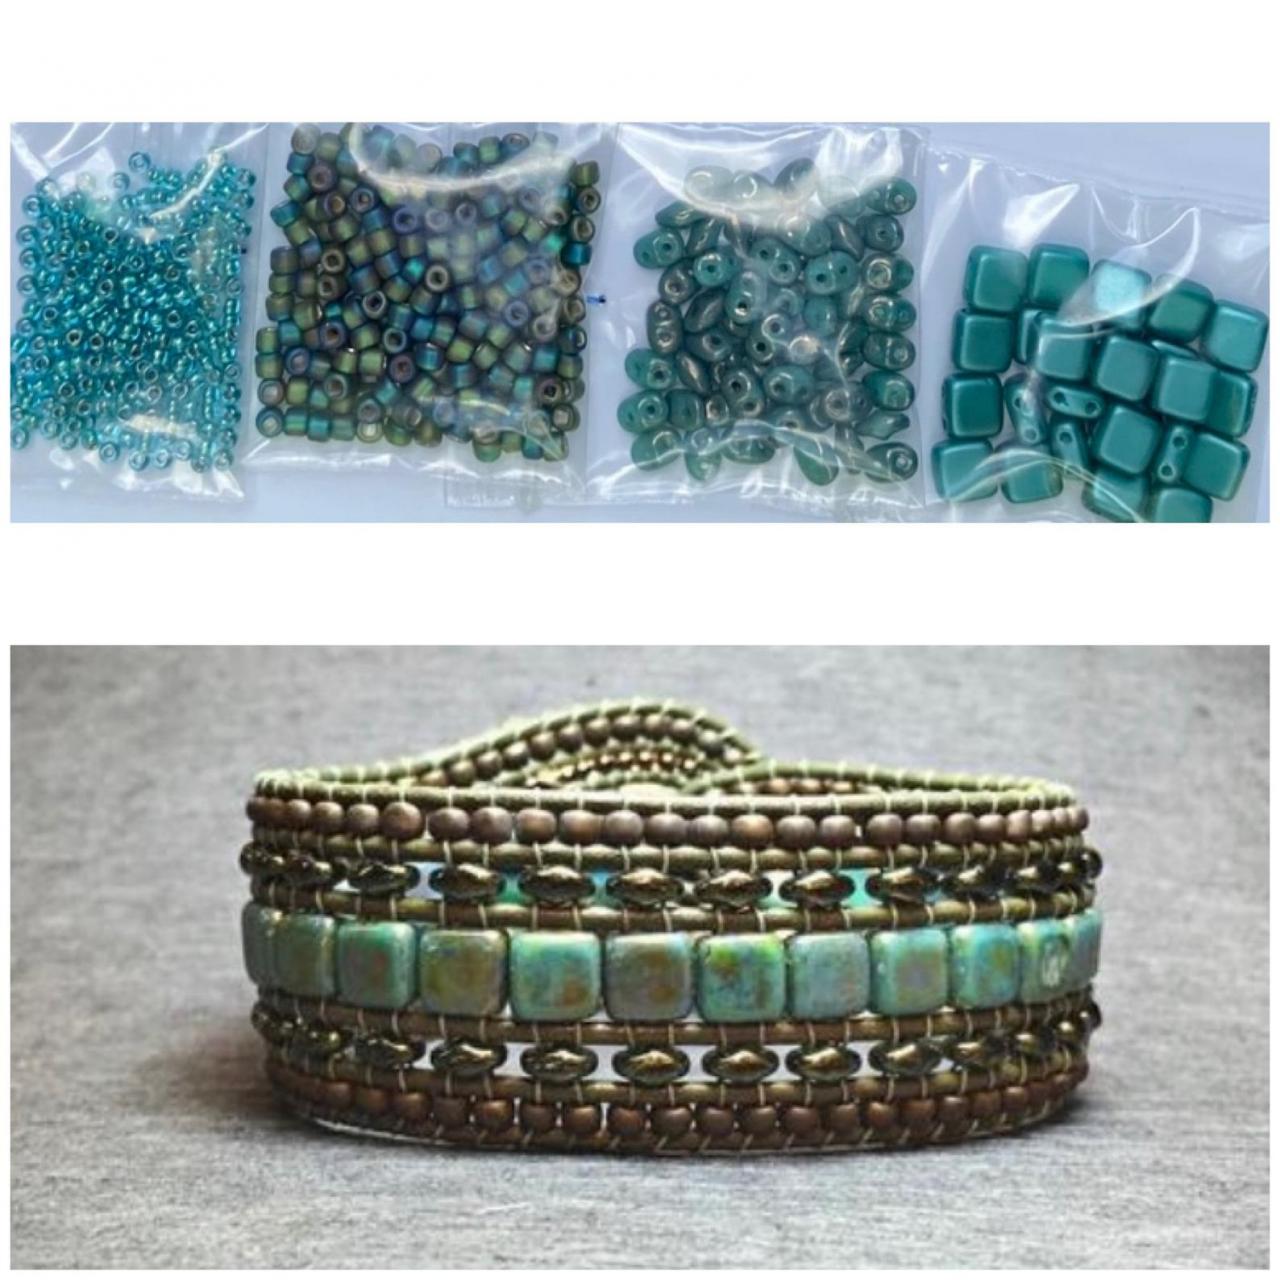 Kit Wide Leather Beaded Cuff Bonny Tan Teal Intermediate Instructions Complete No Tools #19